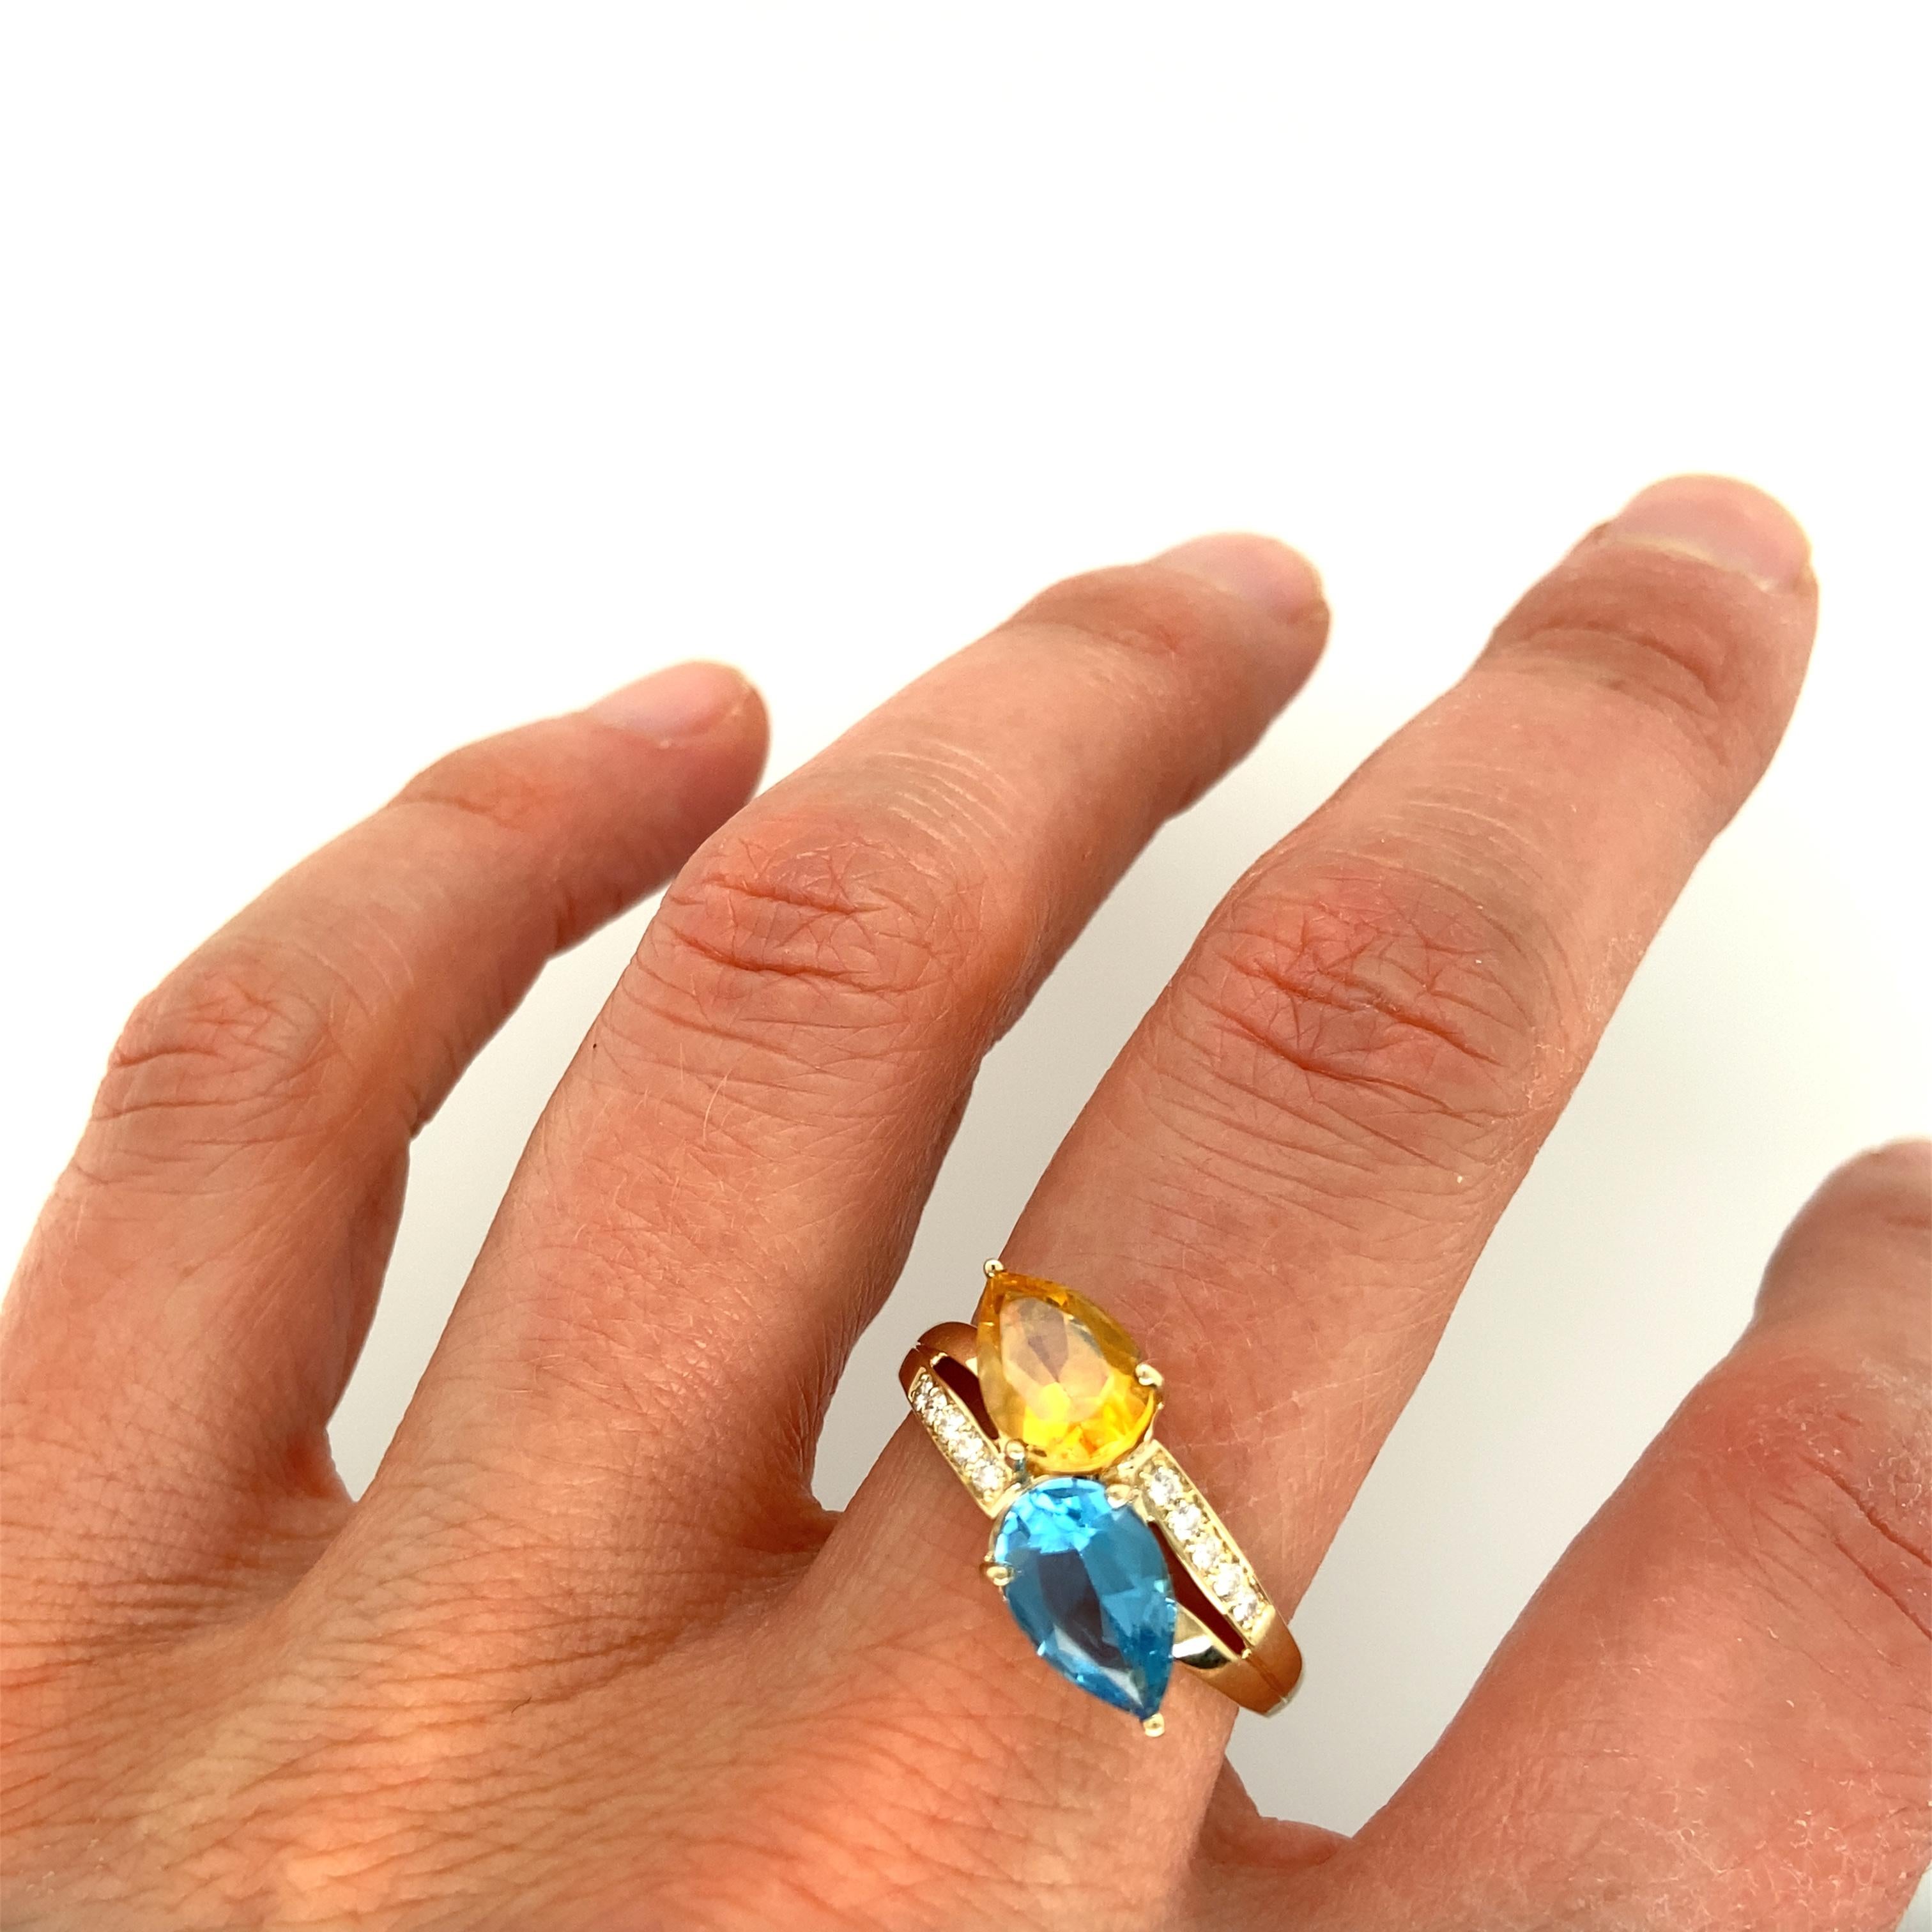 One 14 karat yellow gold ring set with one 9x6.5mm pear shaped blue topaz, one 9x6.5mm pear shaped golden citrine, and ten brilliant cut diamonds, 0.10 carat total weight with matching H/I color and SI clarity.  The shank measures 3.95mm near the